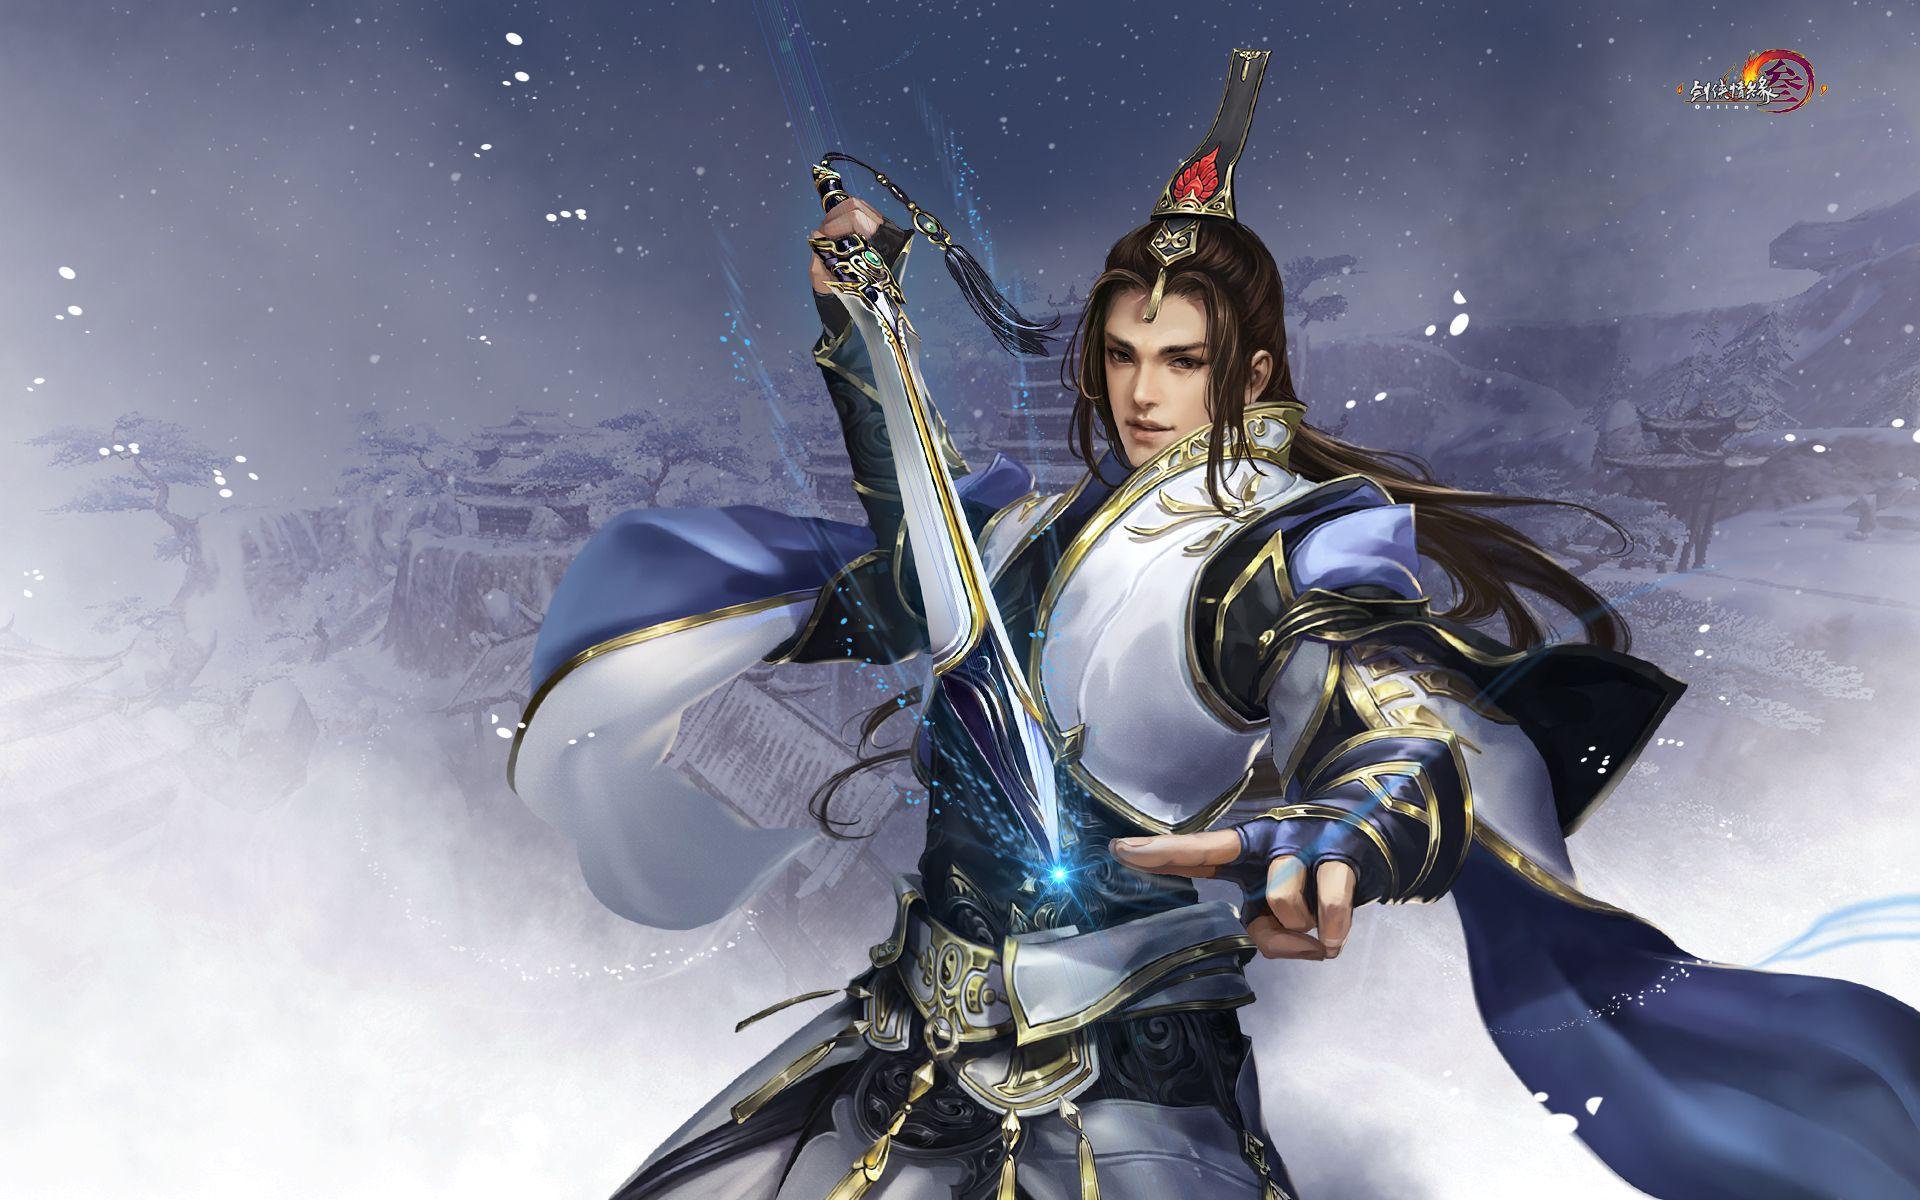 Action games with Chinese fantasy setting ie wuxia, xianxia